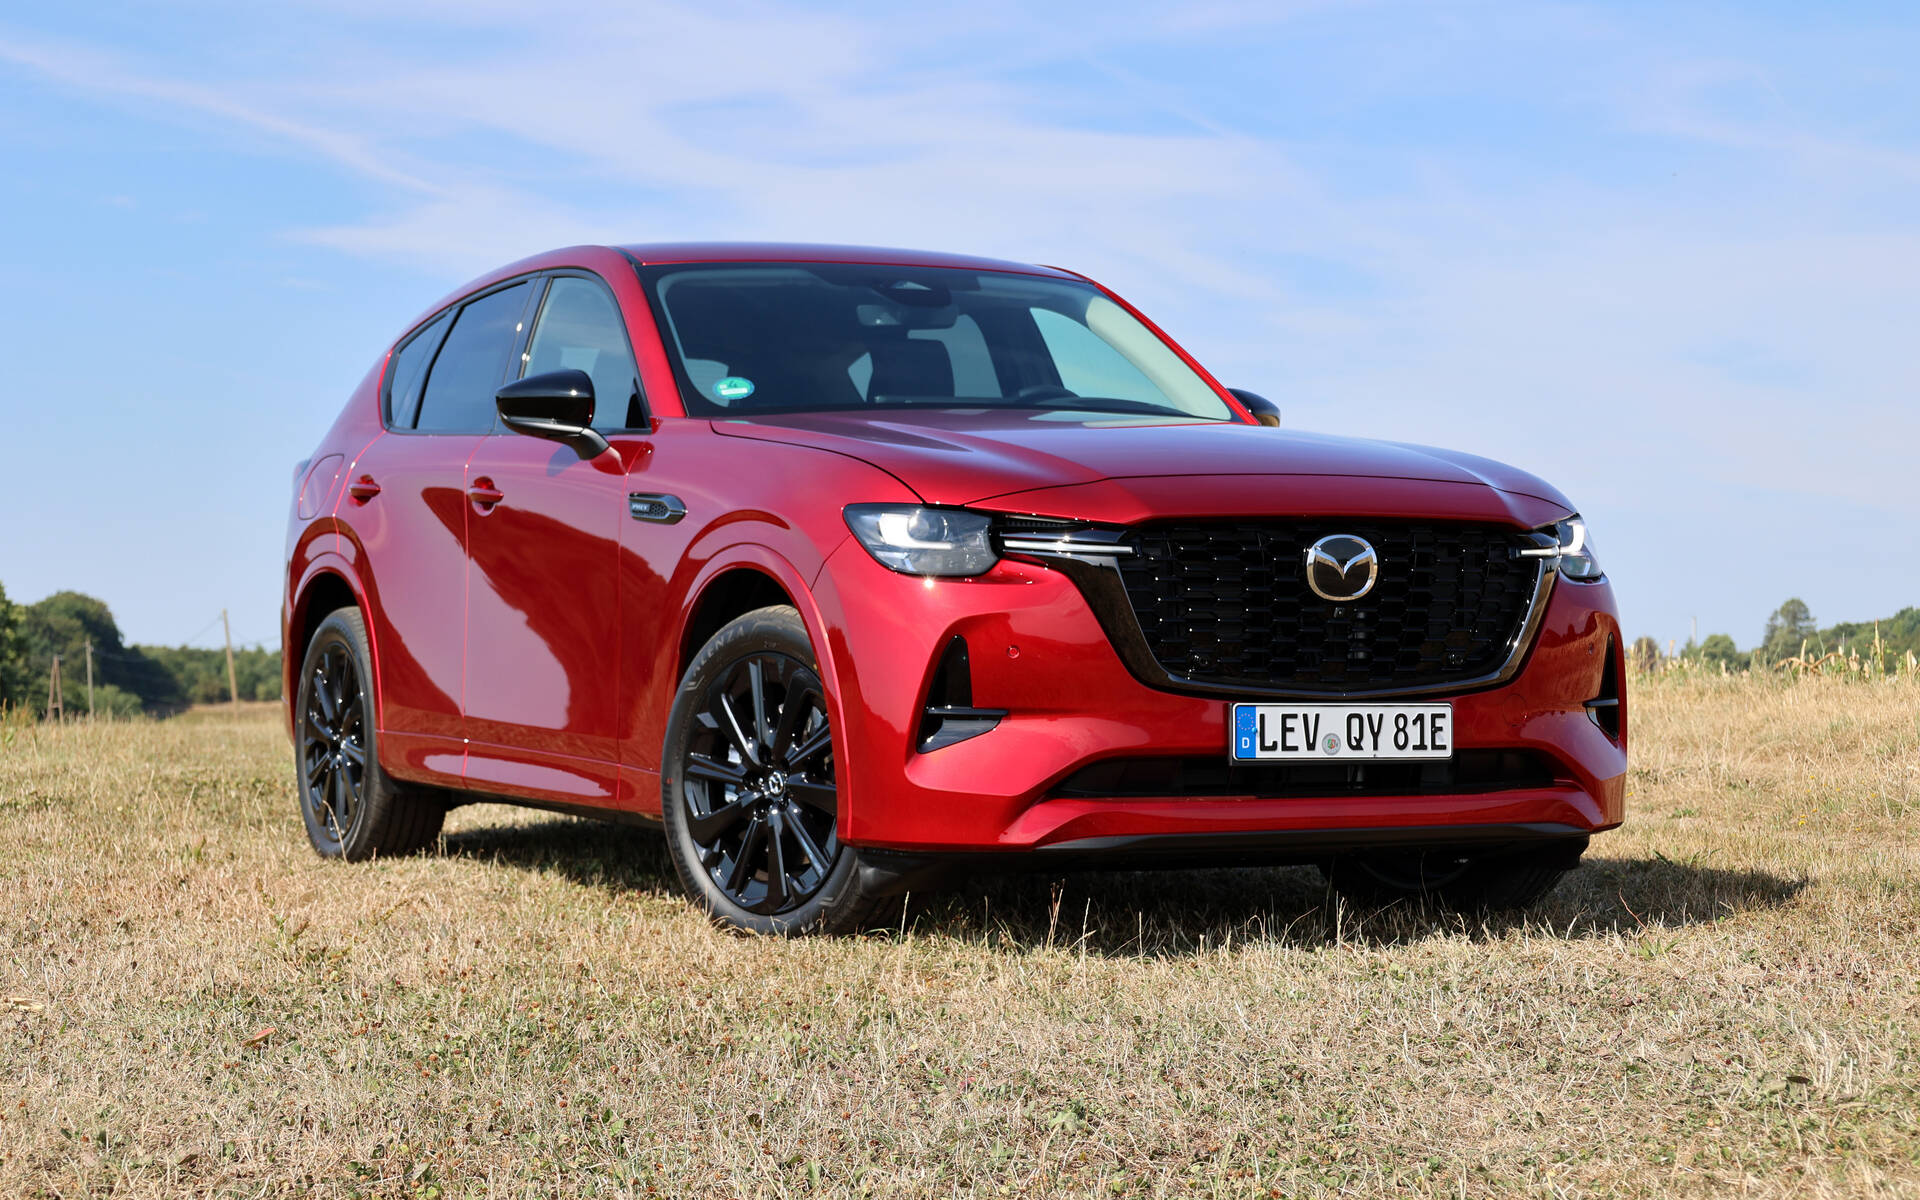 Mazda CX-60 will be first plug-in hybrid; deliveries begin this summer